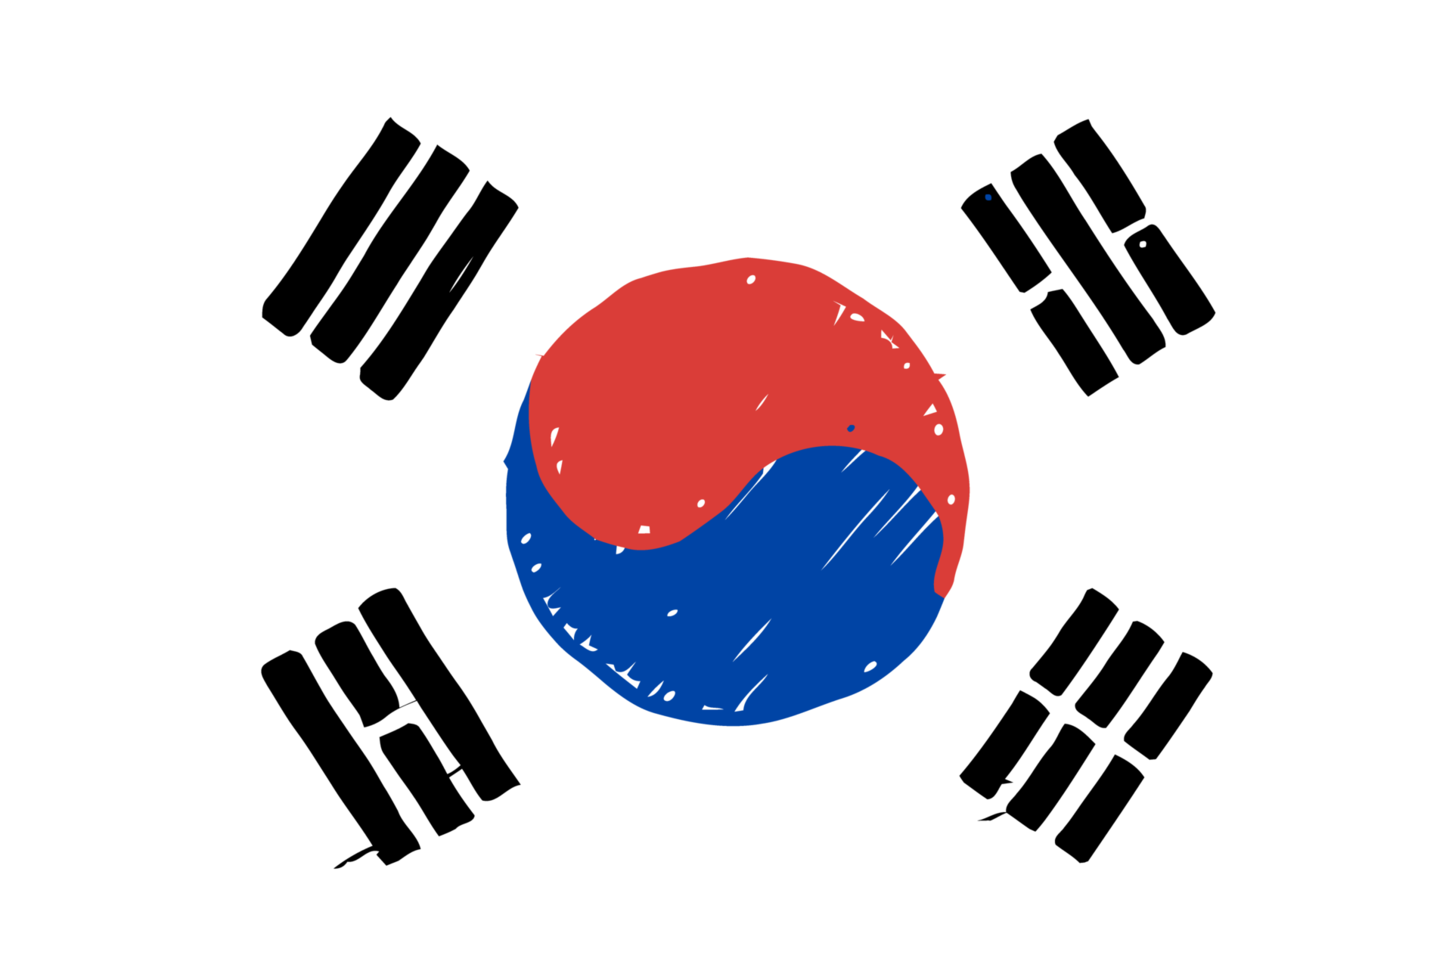 South Korea National Country Flag Pencil Color Sketch Illustration with Transparent Background png